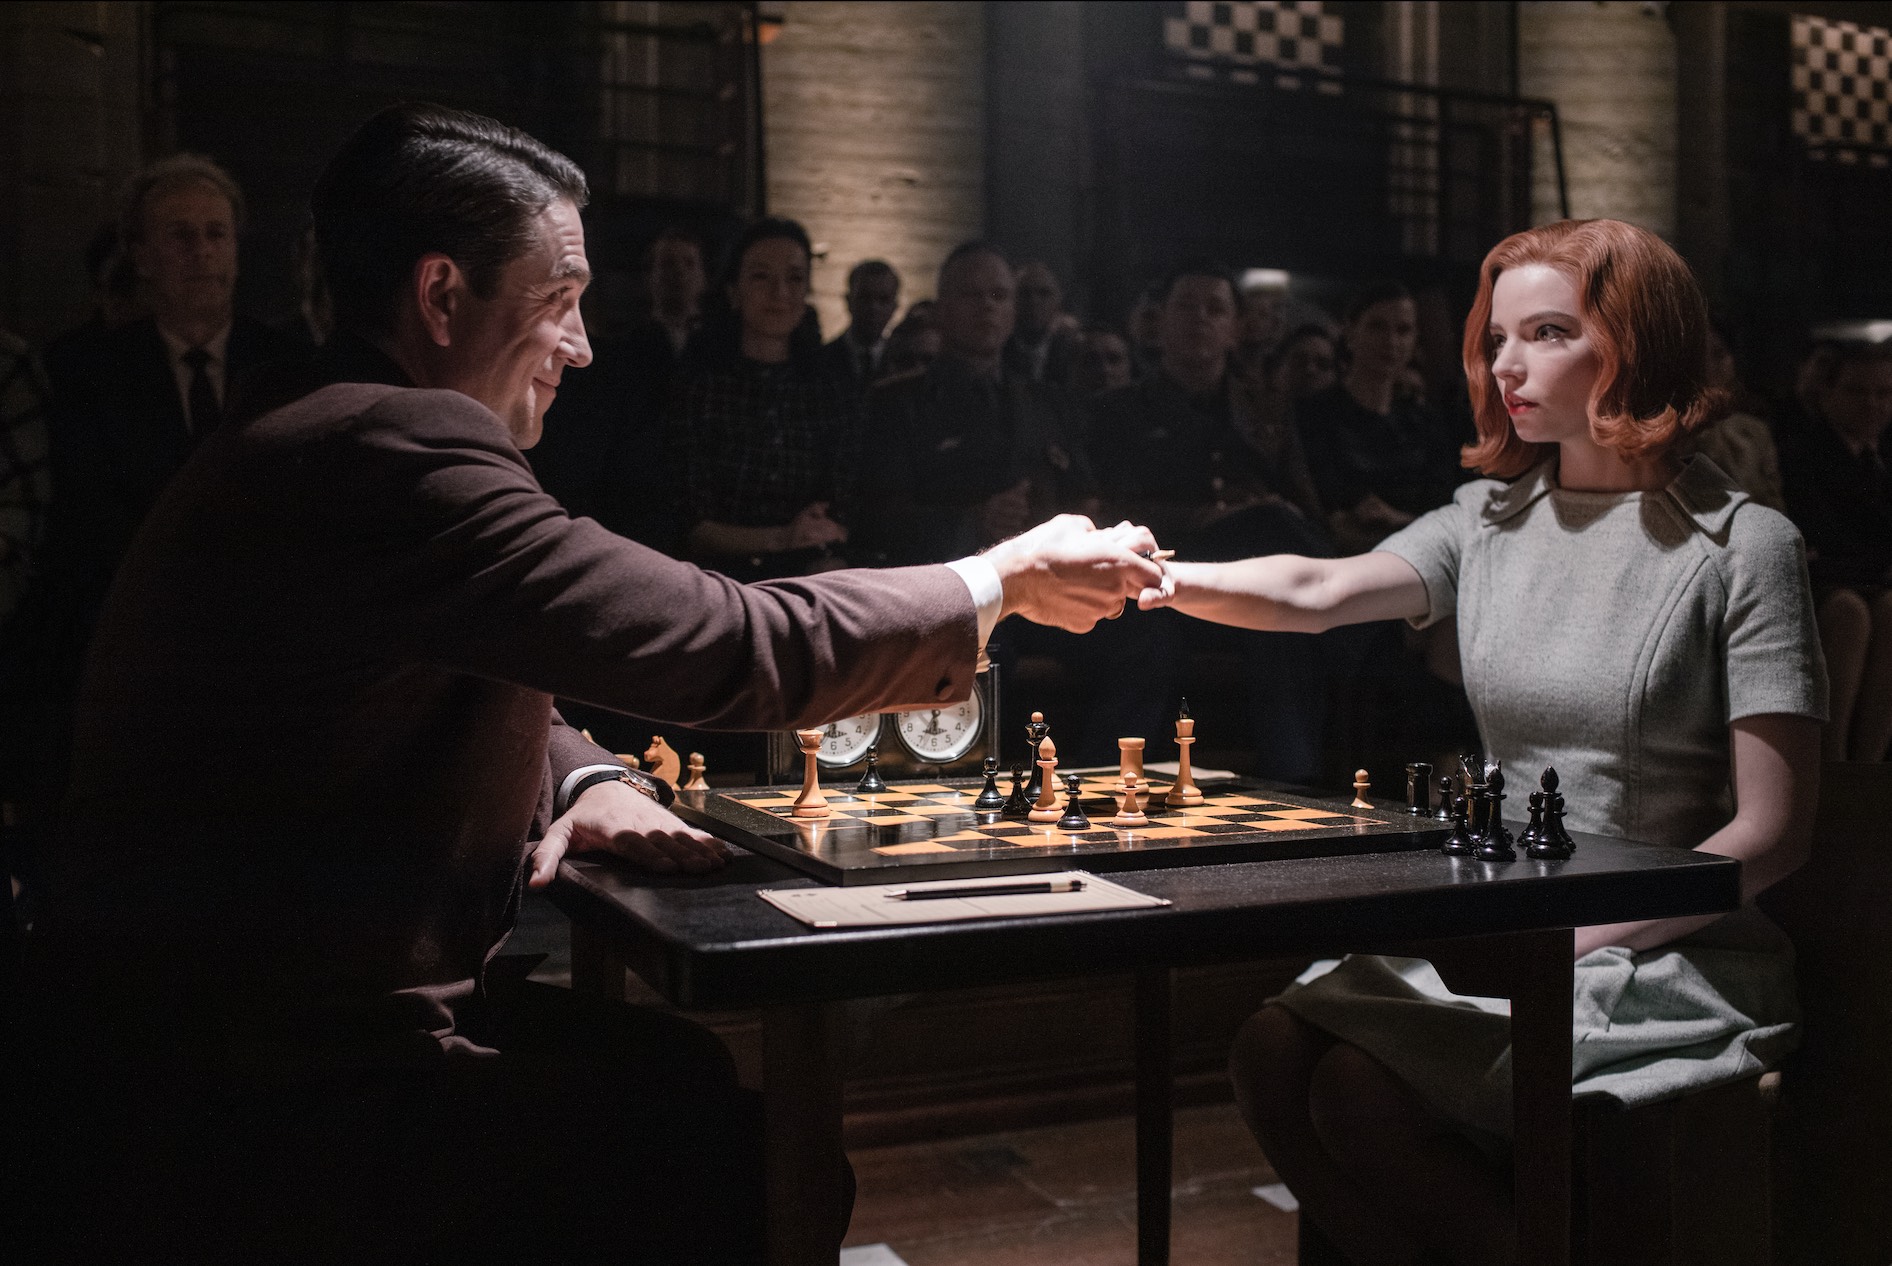 The Queen's Gambit wins Best Limited Series at Golden Globes 2021